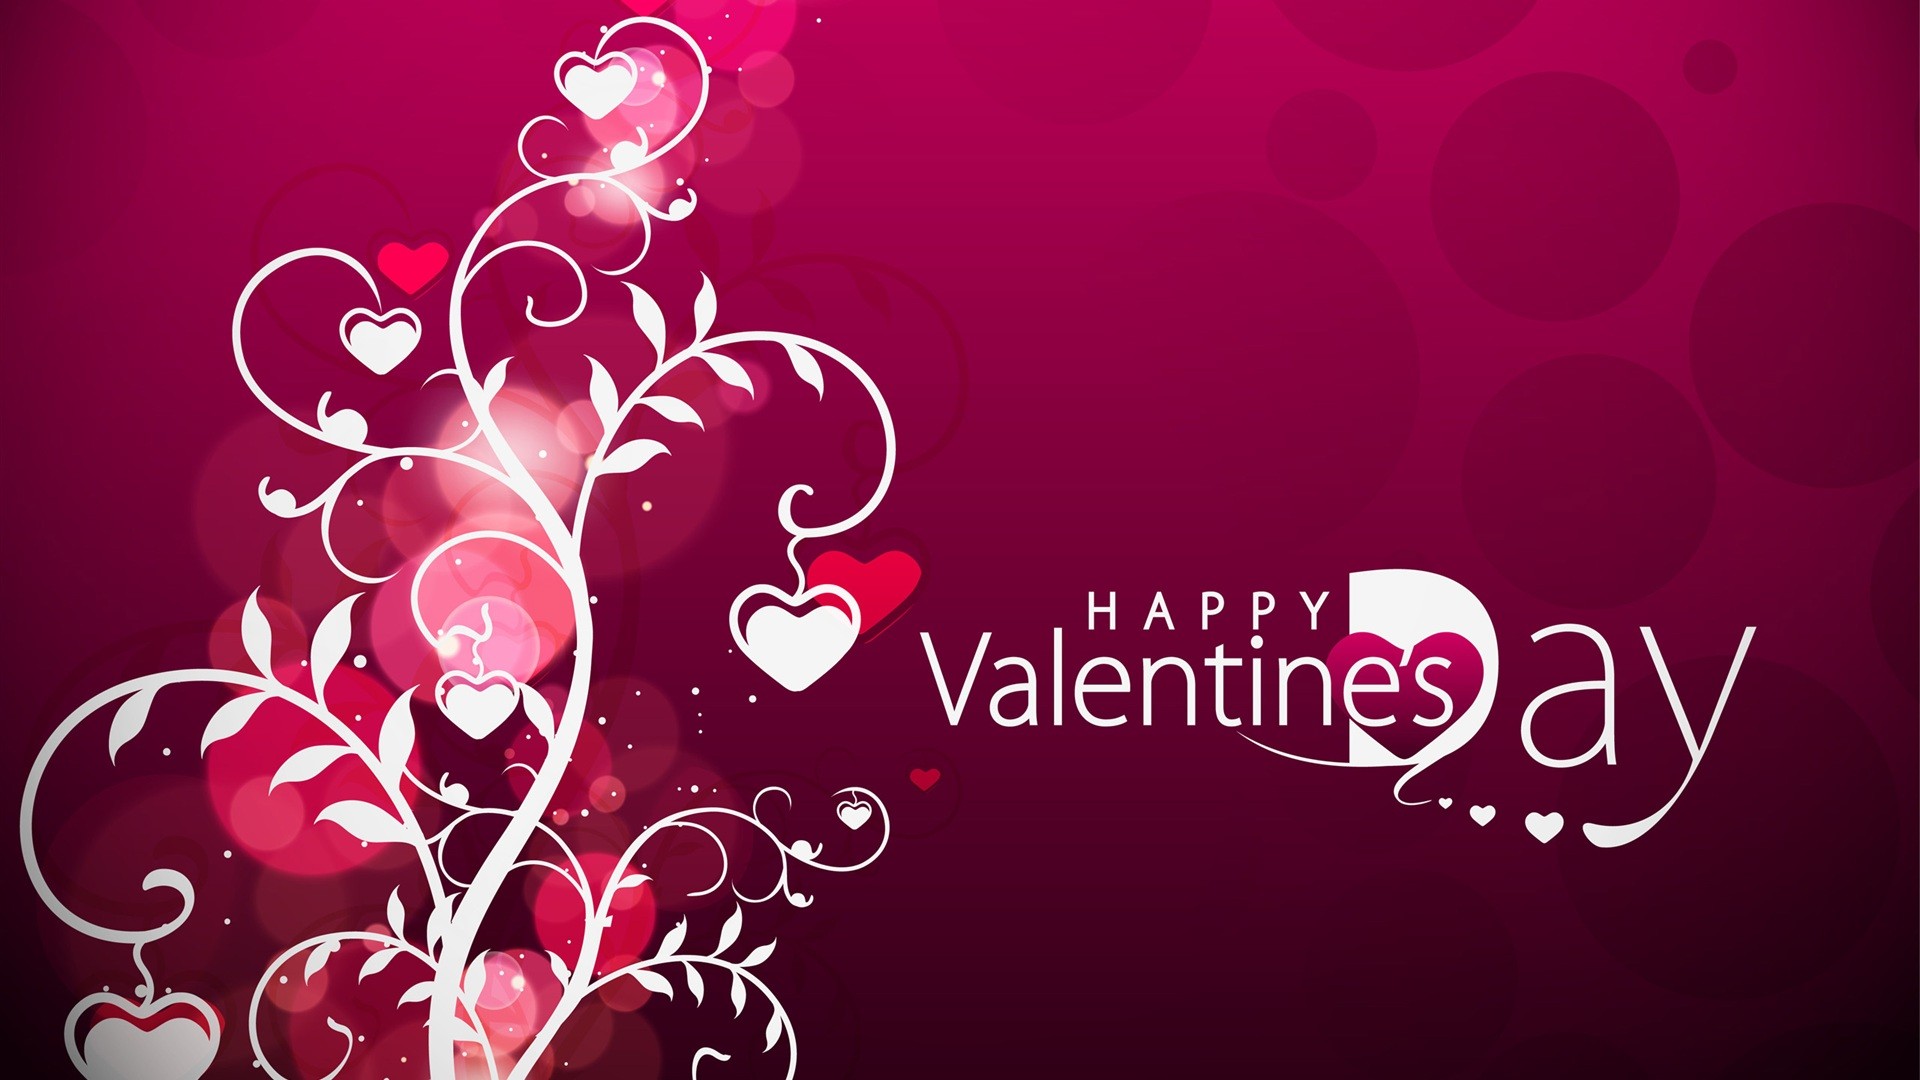 Happy Valentines Day HD Wallpapers Backgrounds